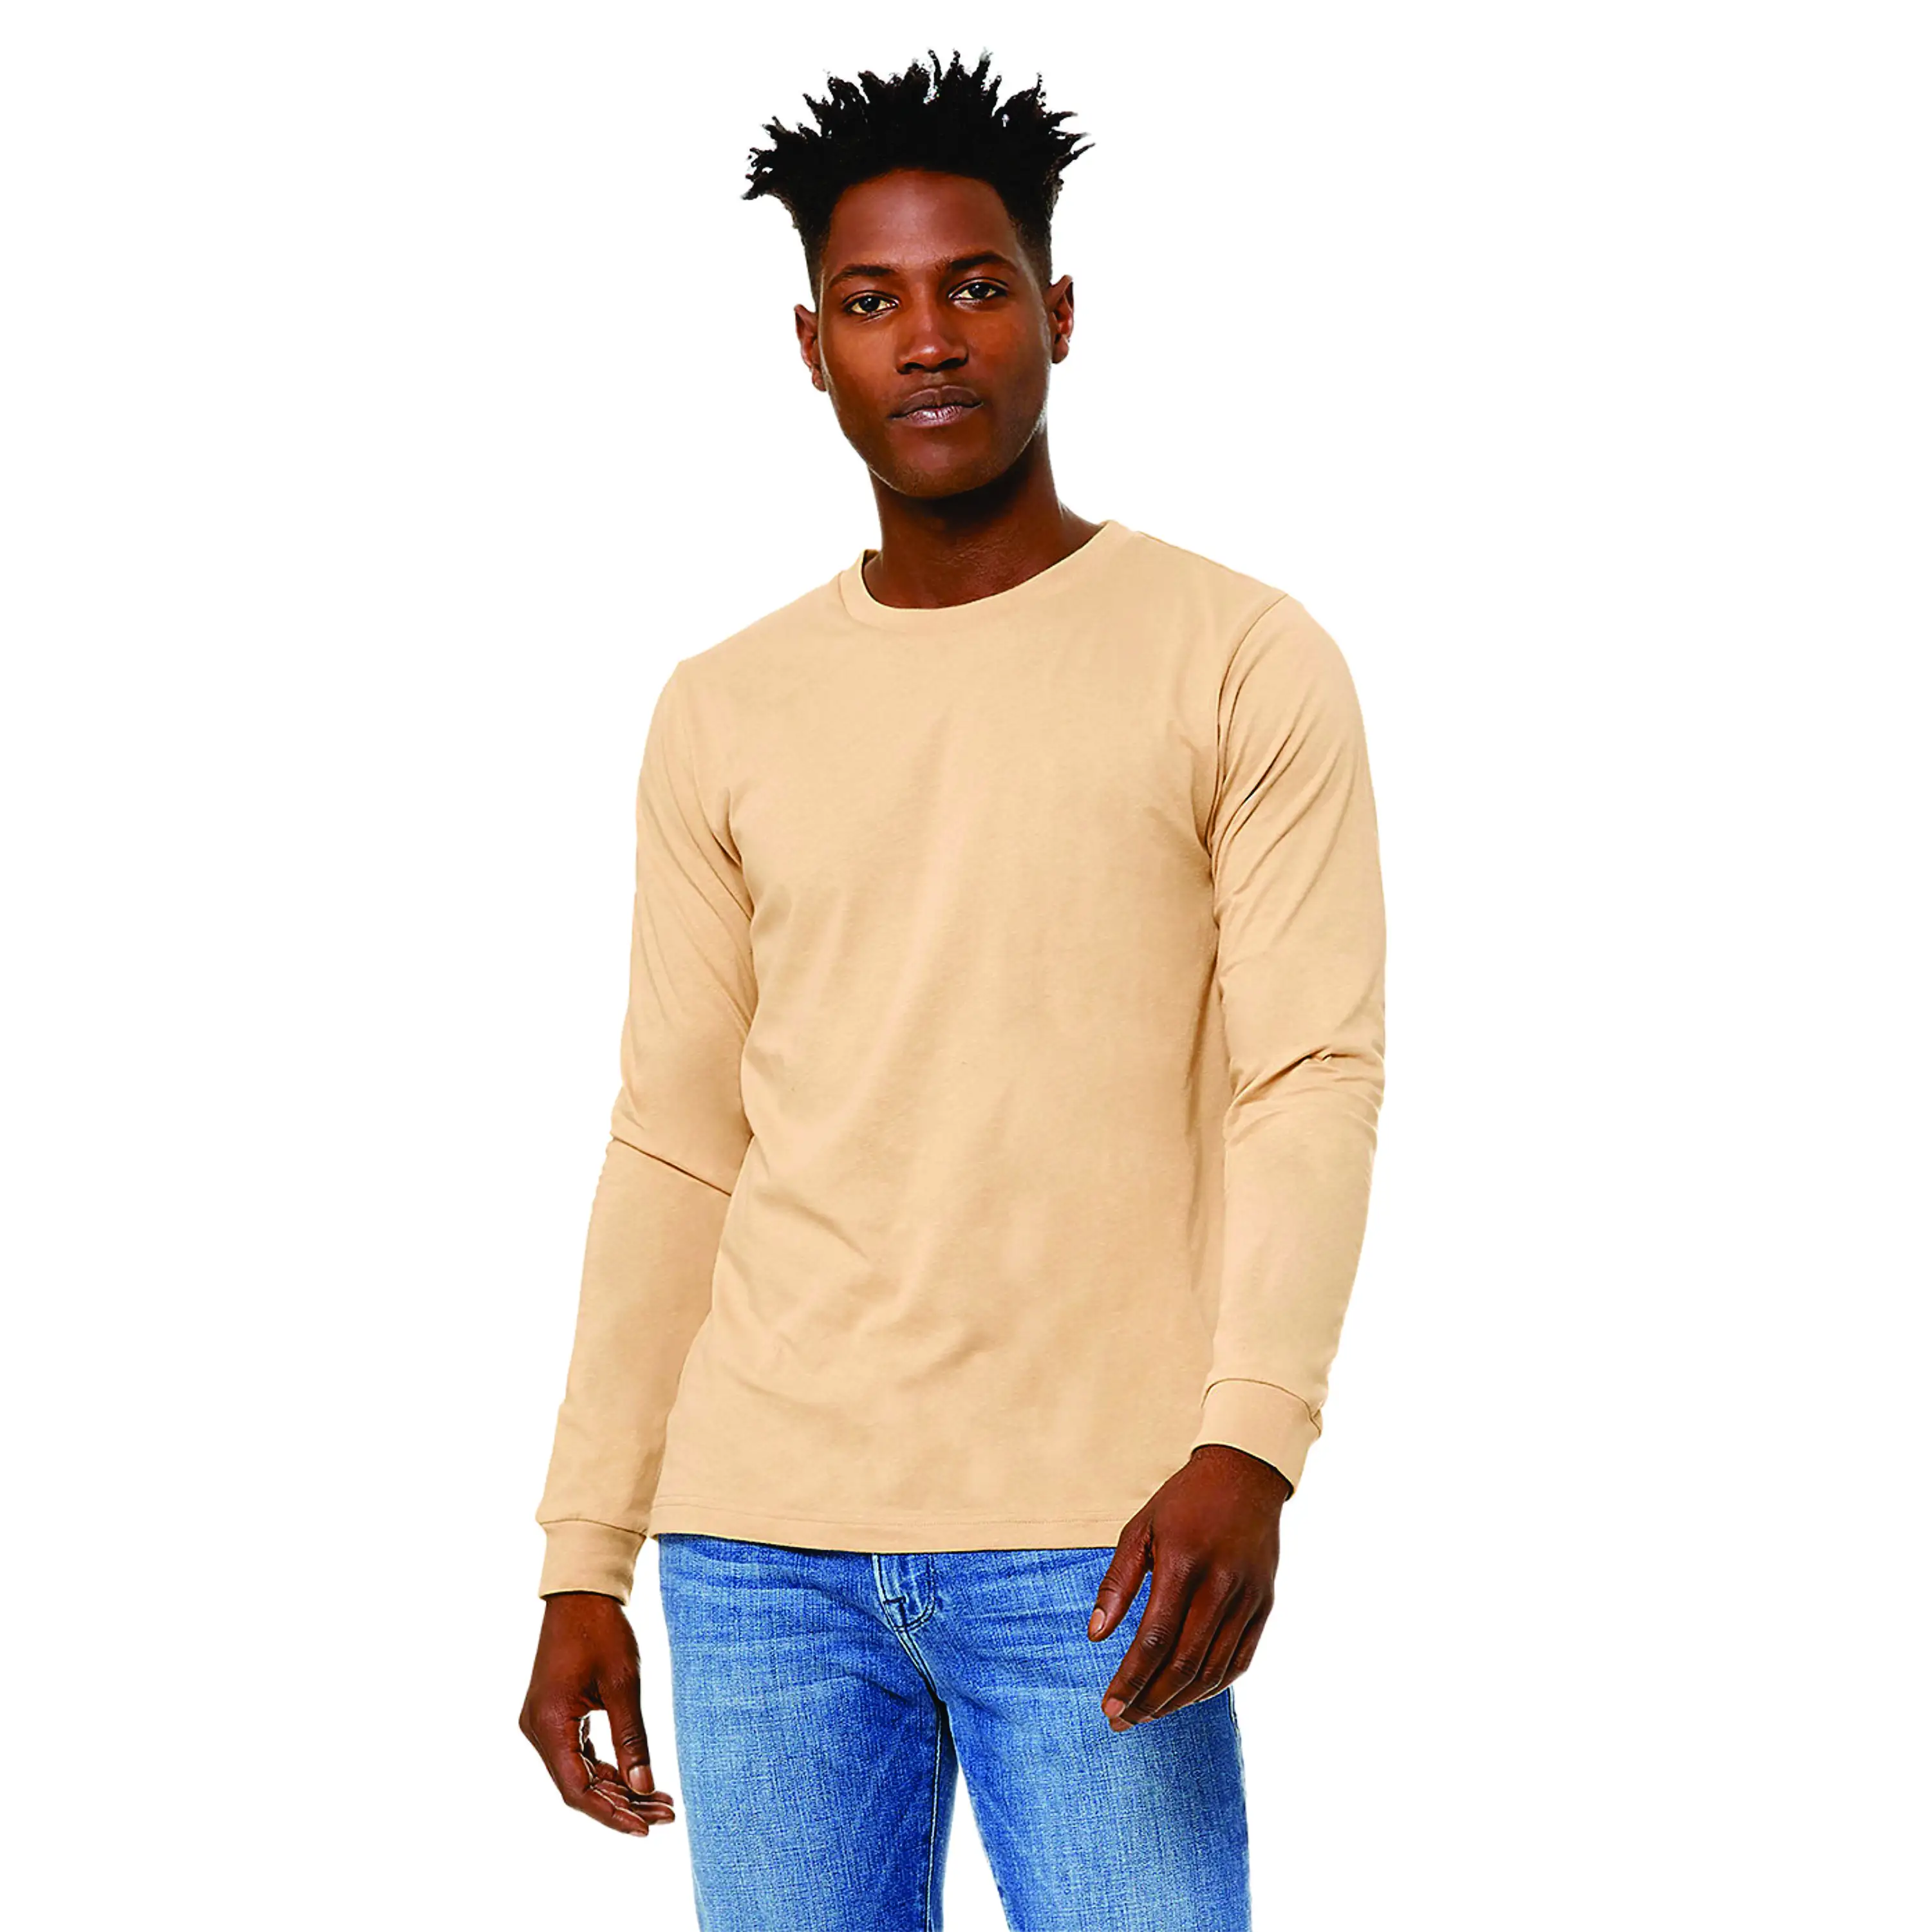 100% Airlume Combed and Ring Spun Cotton 32 Single 4.2 oz Sand Dune Classic Crew Neck Unisex Jersey Long Sleeves T-Shirt